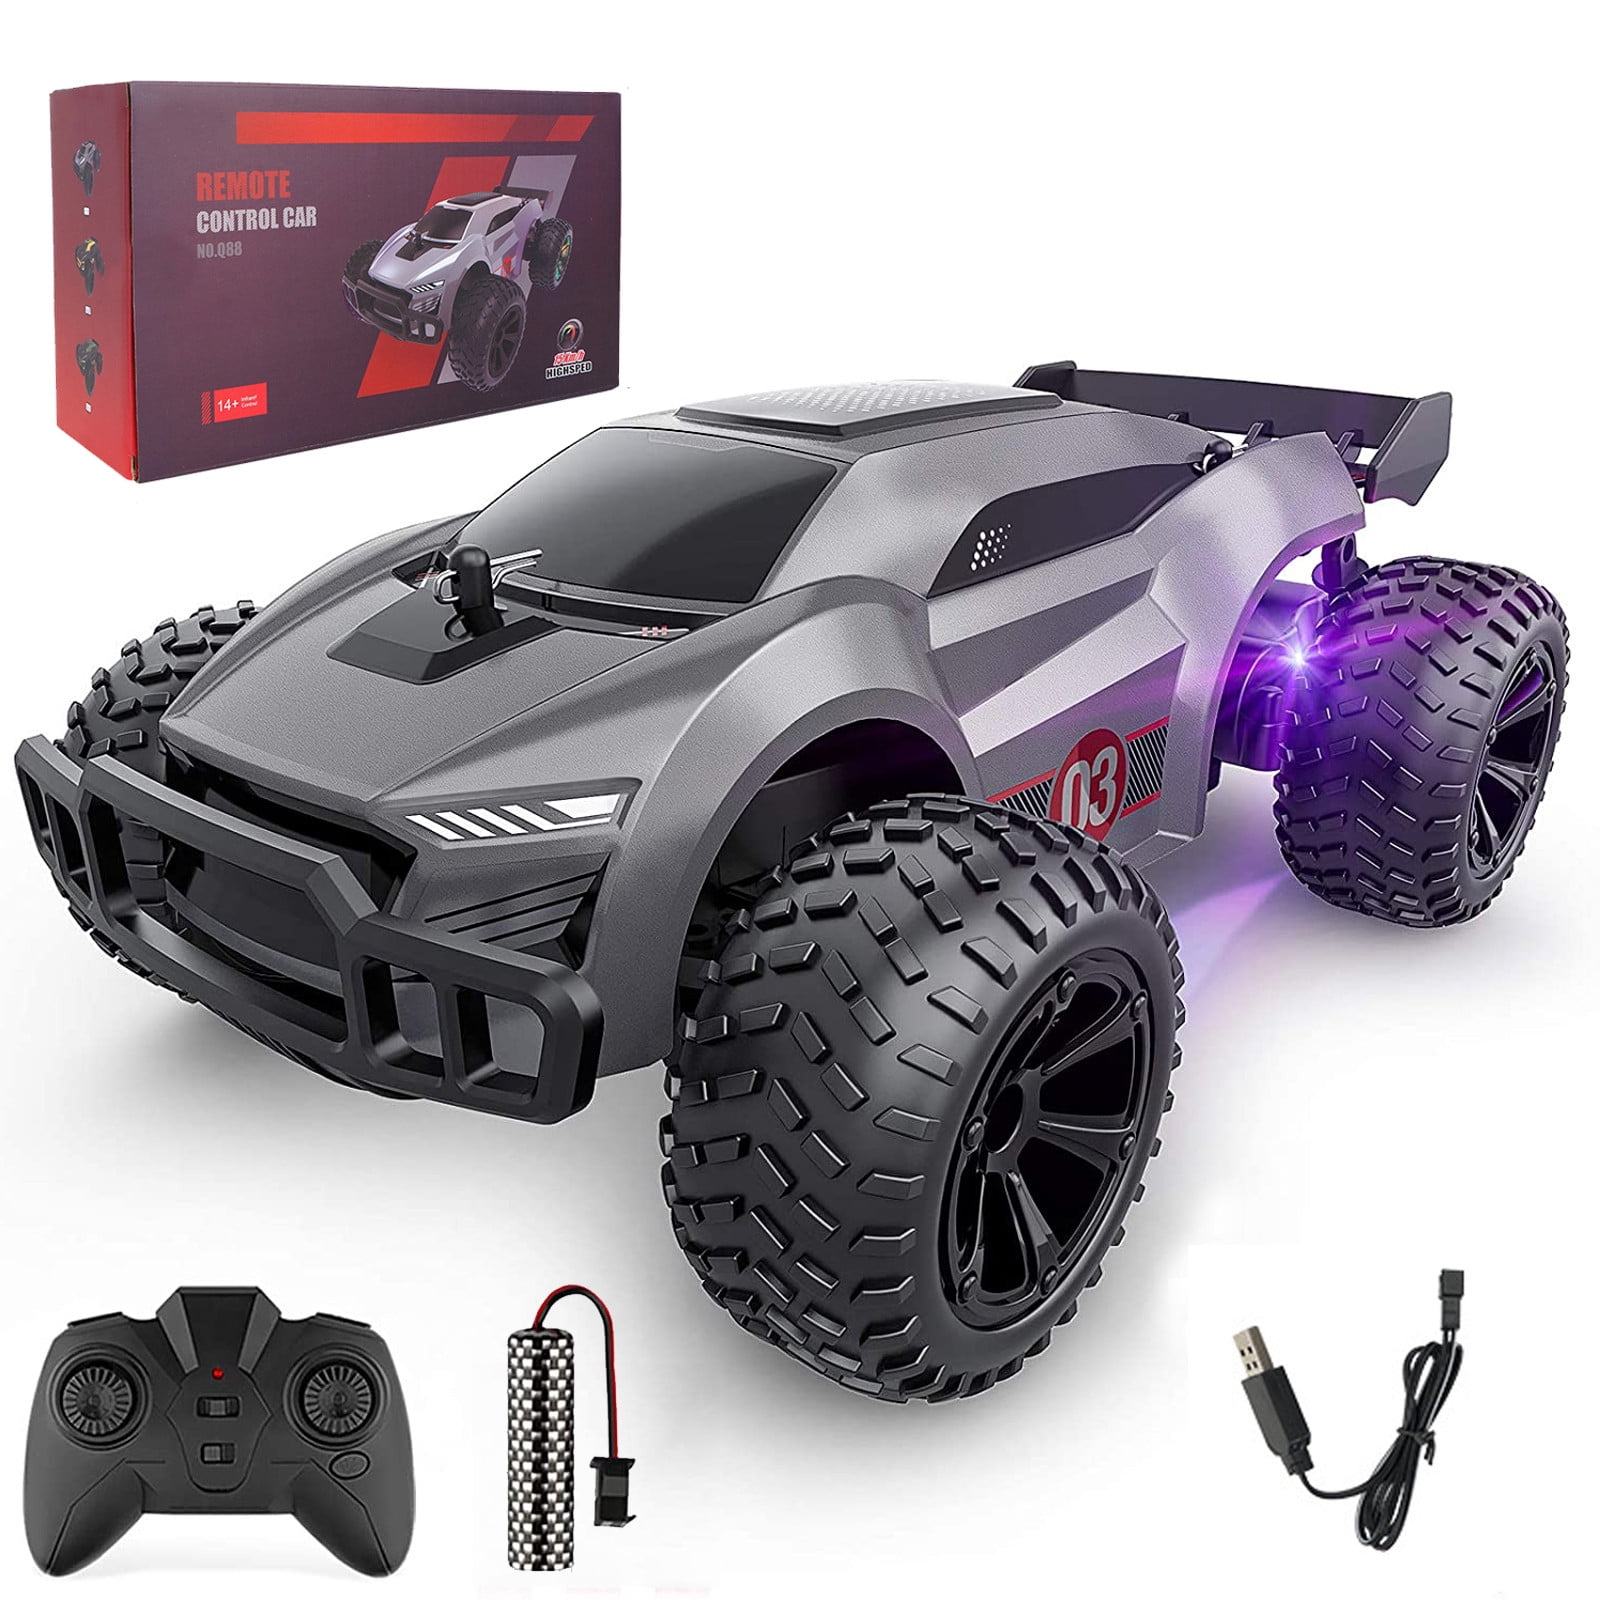 Hi! I just looking at marketplace when this hpi racing rc car showed up. Im  new to nitro rc cars, the seller says it has no accessories or remote, only  what is